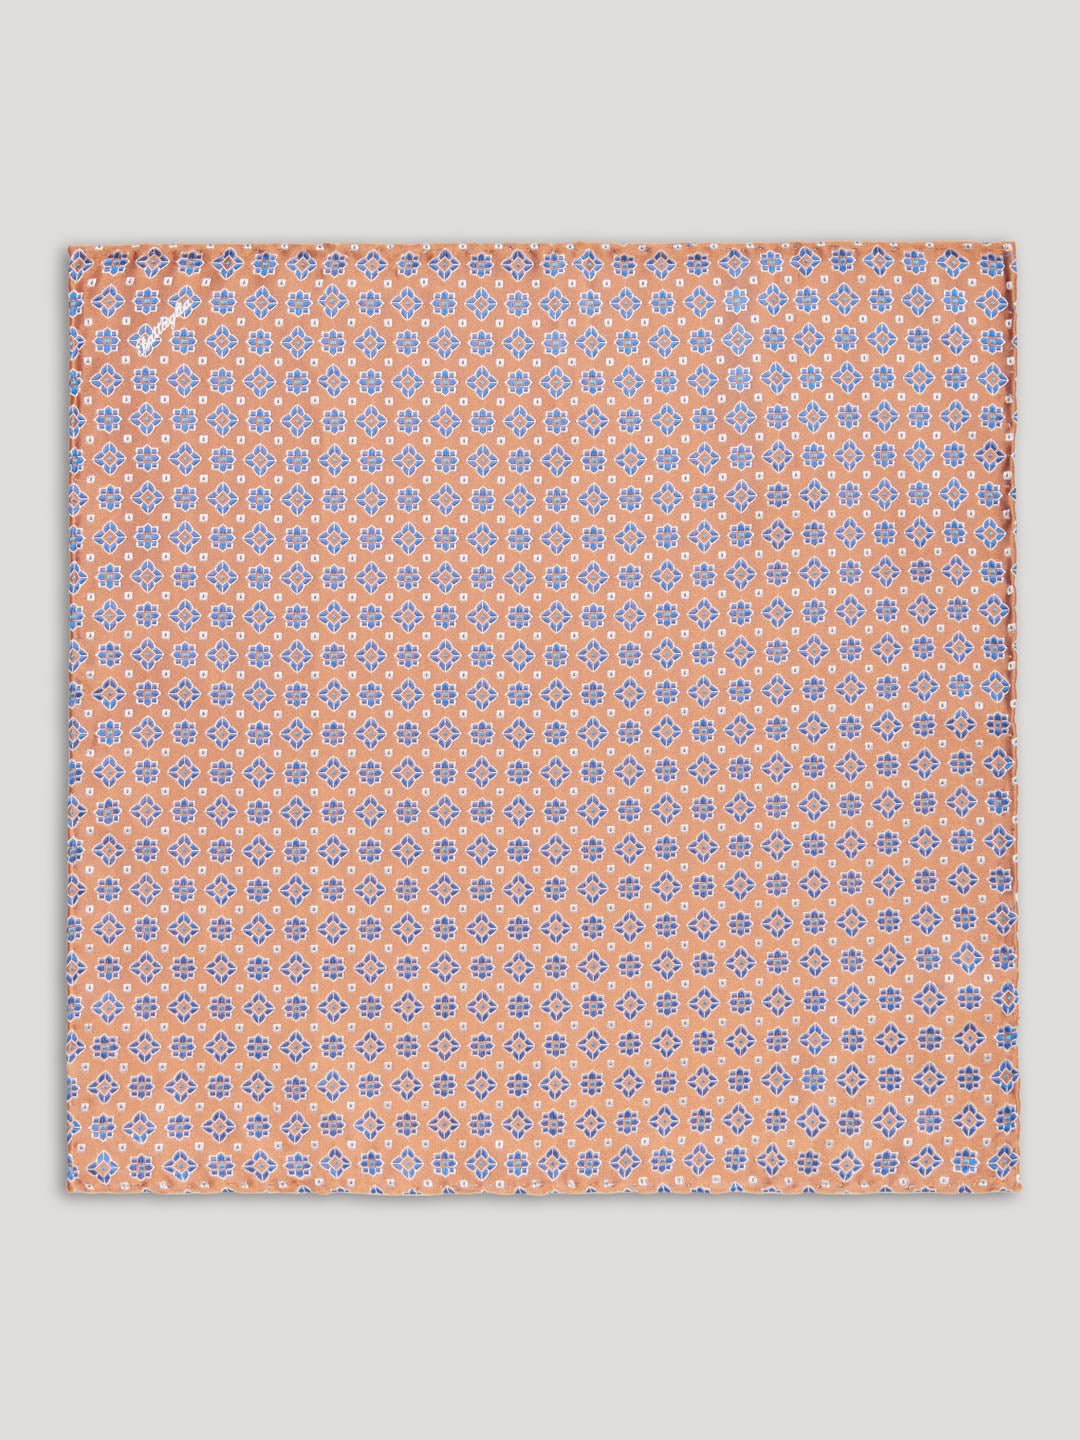 Orange and blue silk handkerchief with large pattern